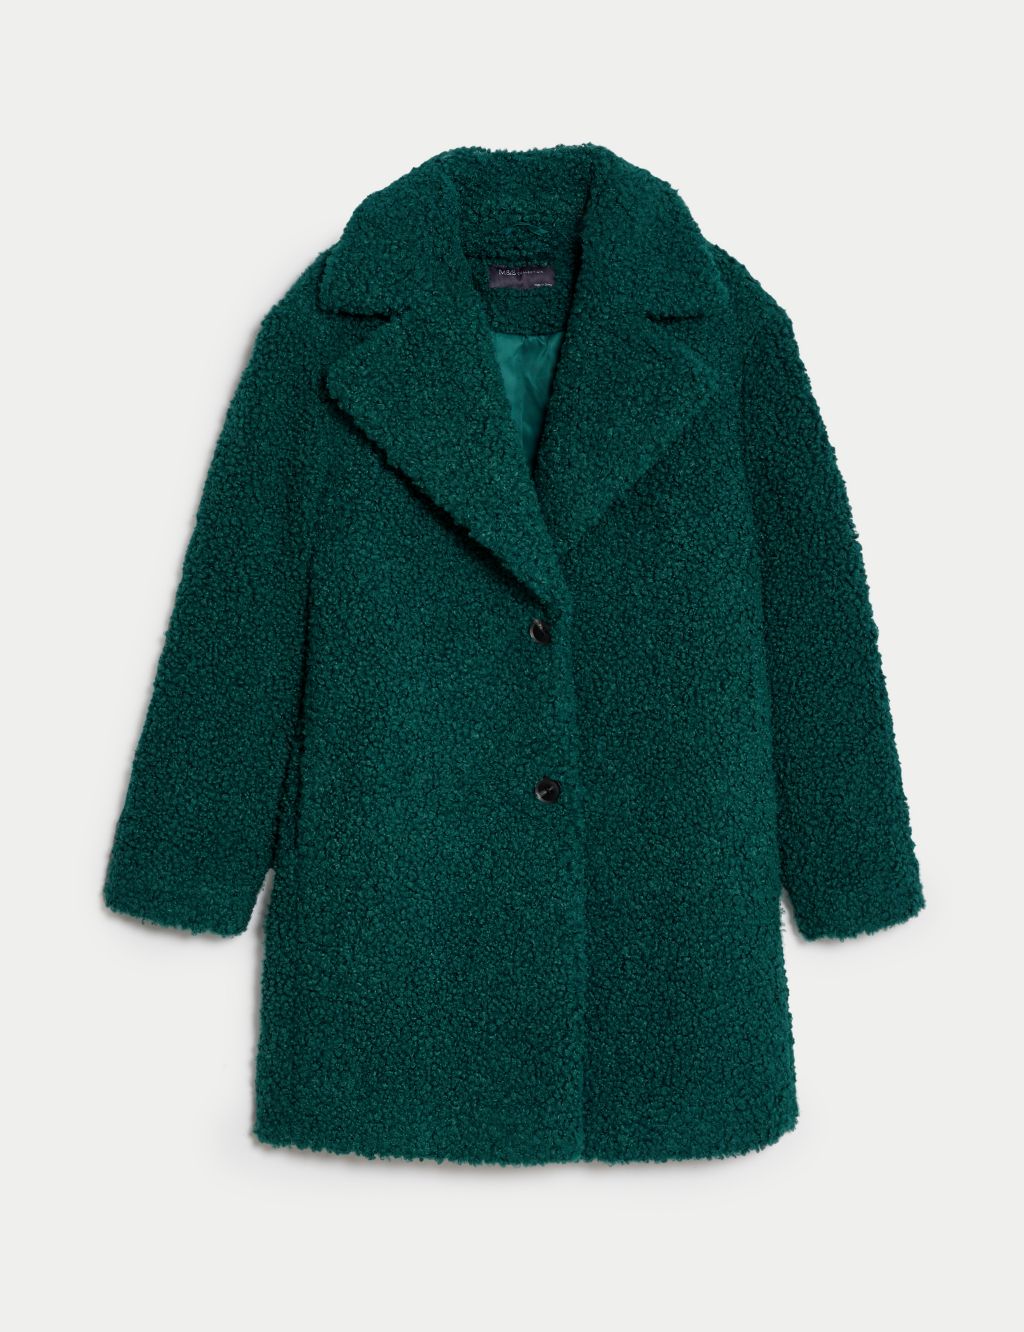 Textured Double Breasted Tailored Coat image 2